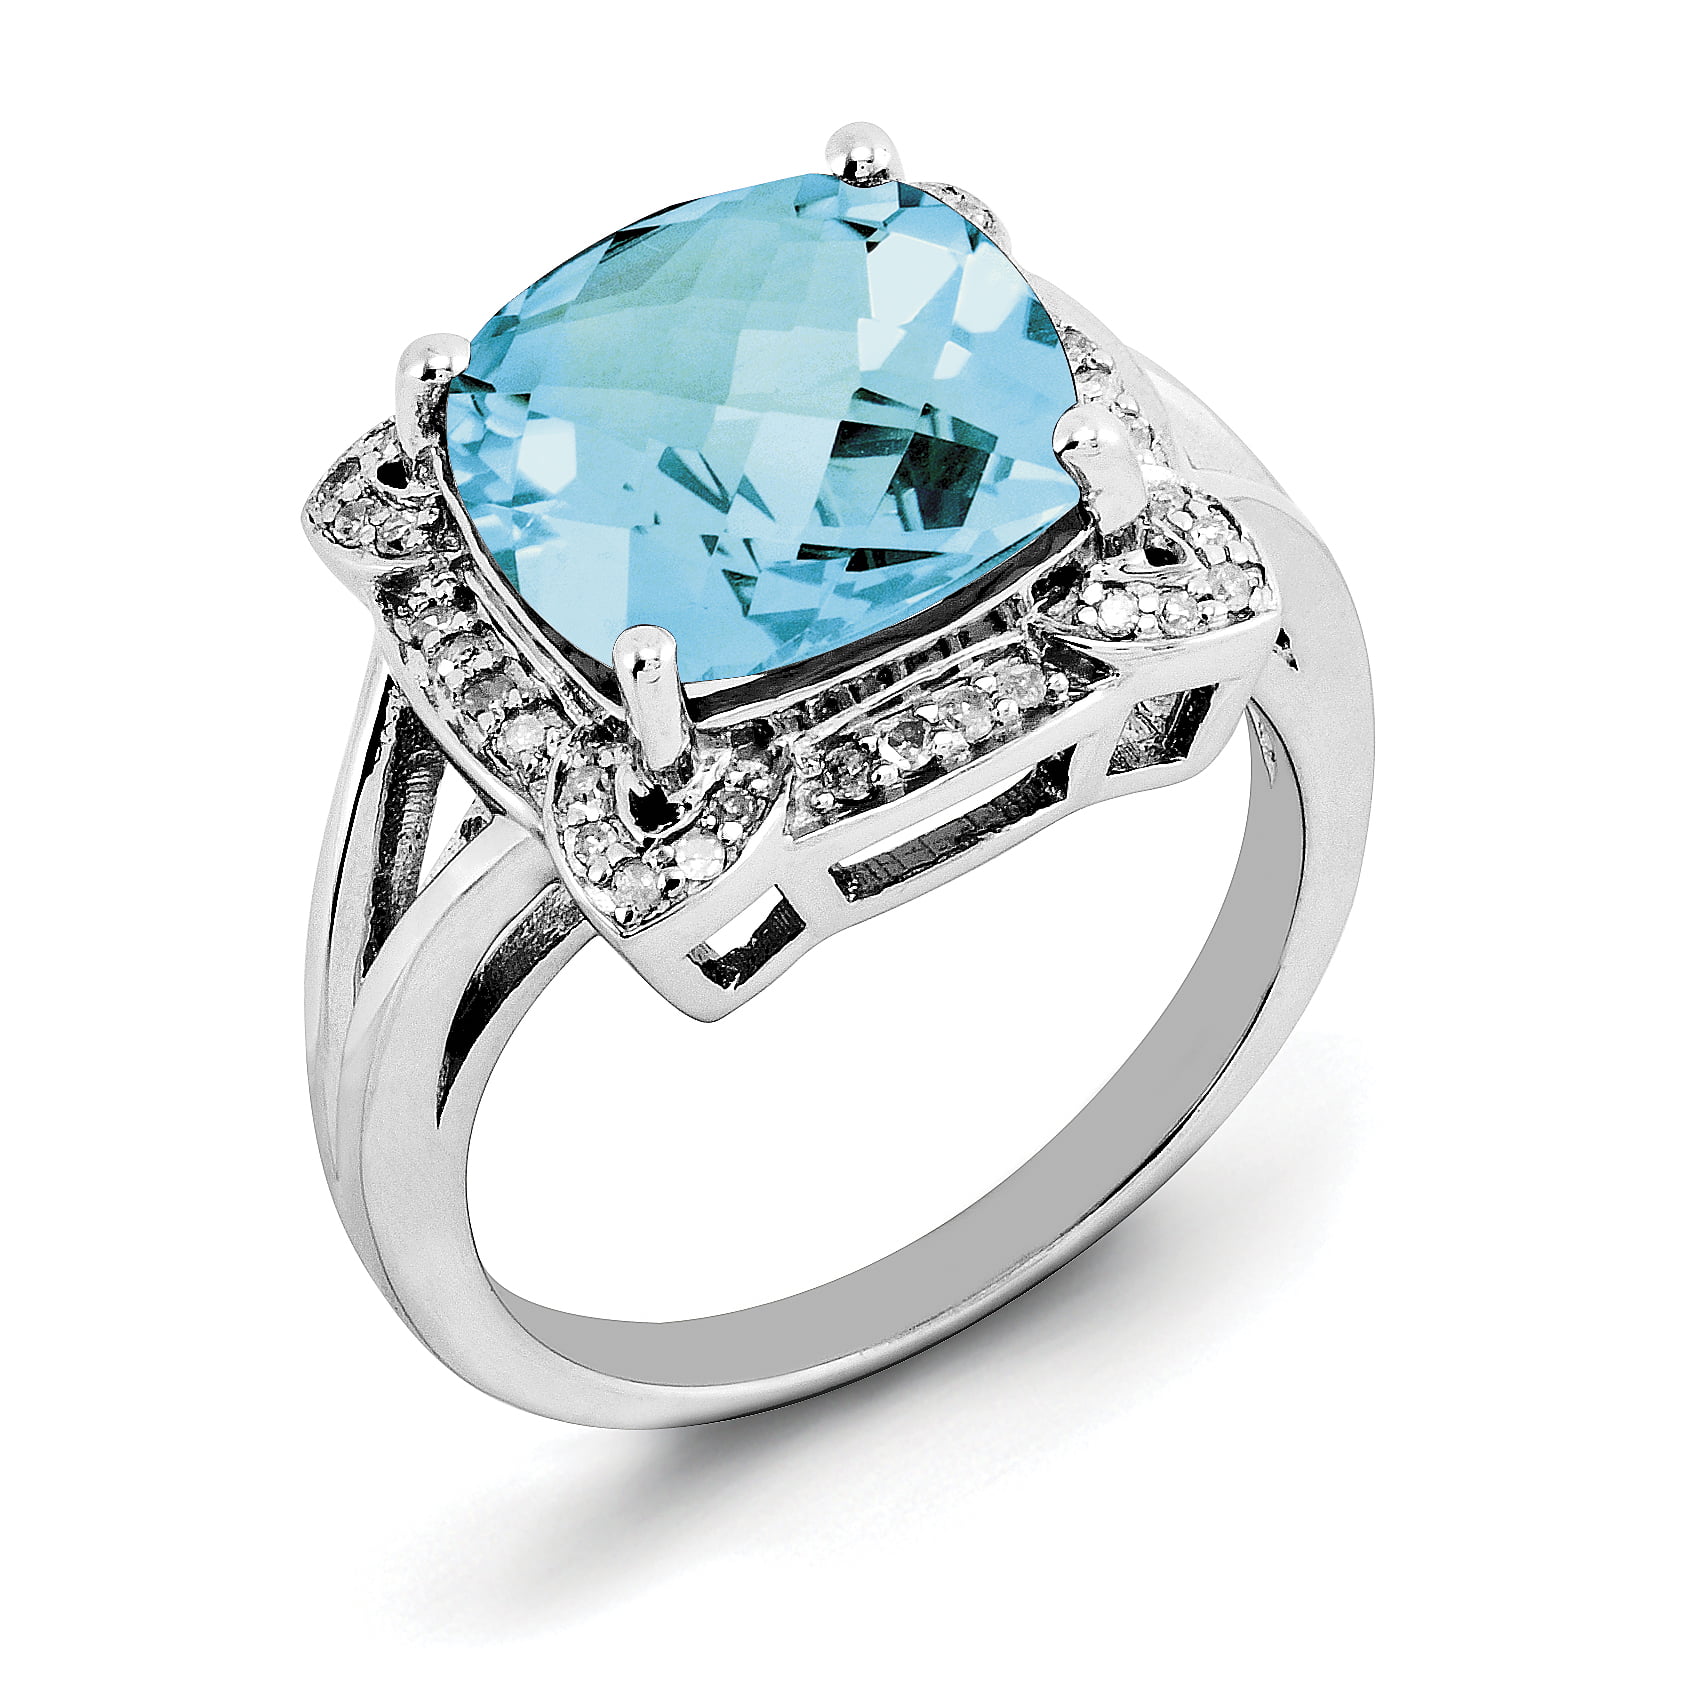 5 ct Cushion Cut Blue Topaz Solitaire Sterling Silver Ring Size 6.25 7 8 9.25 